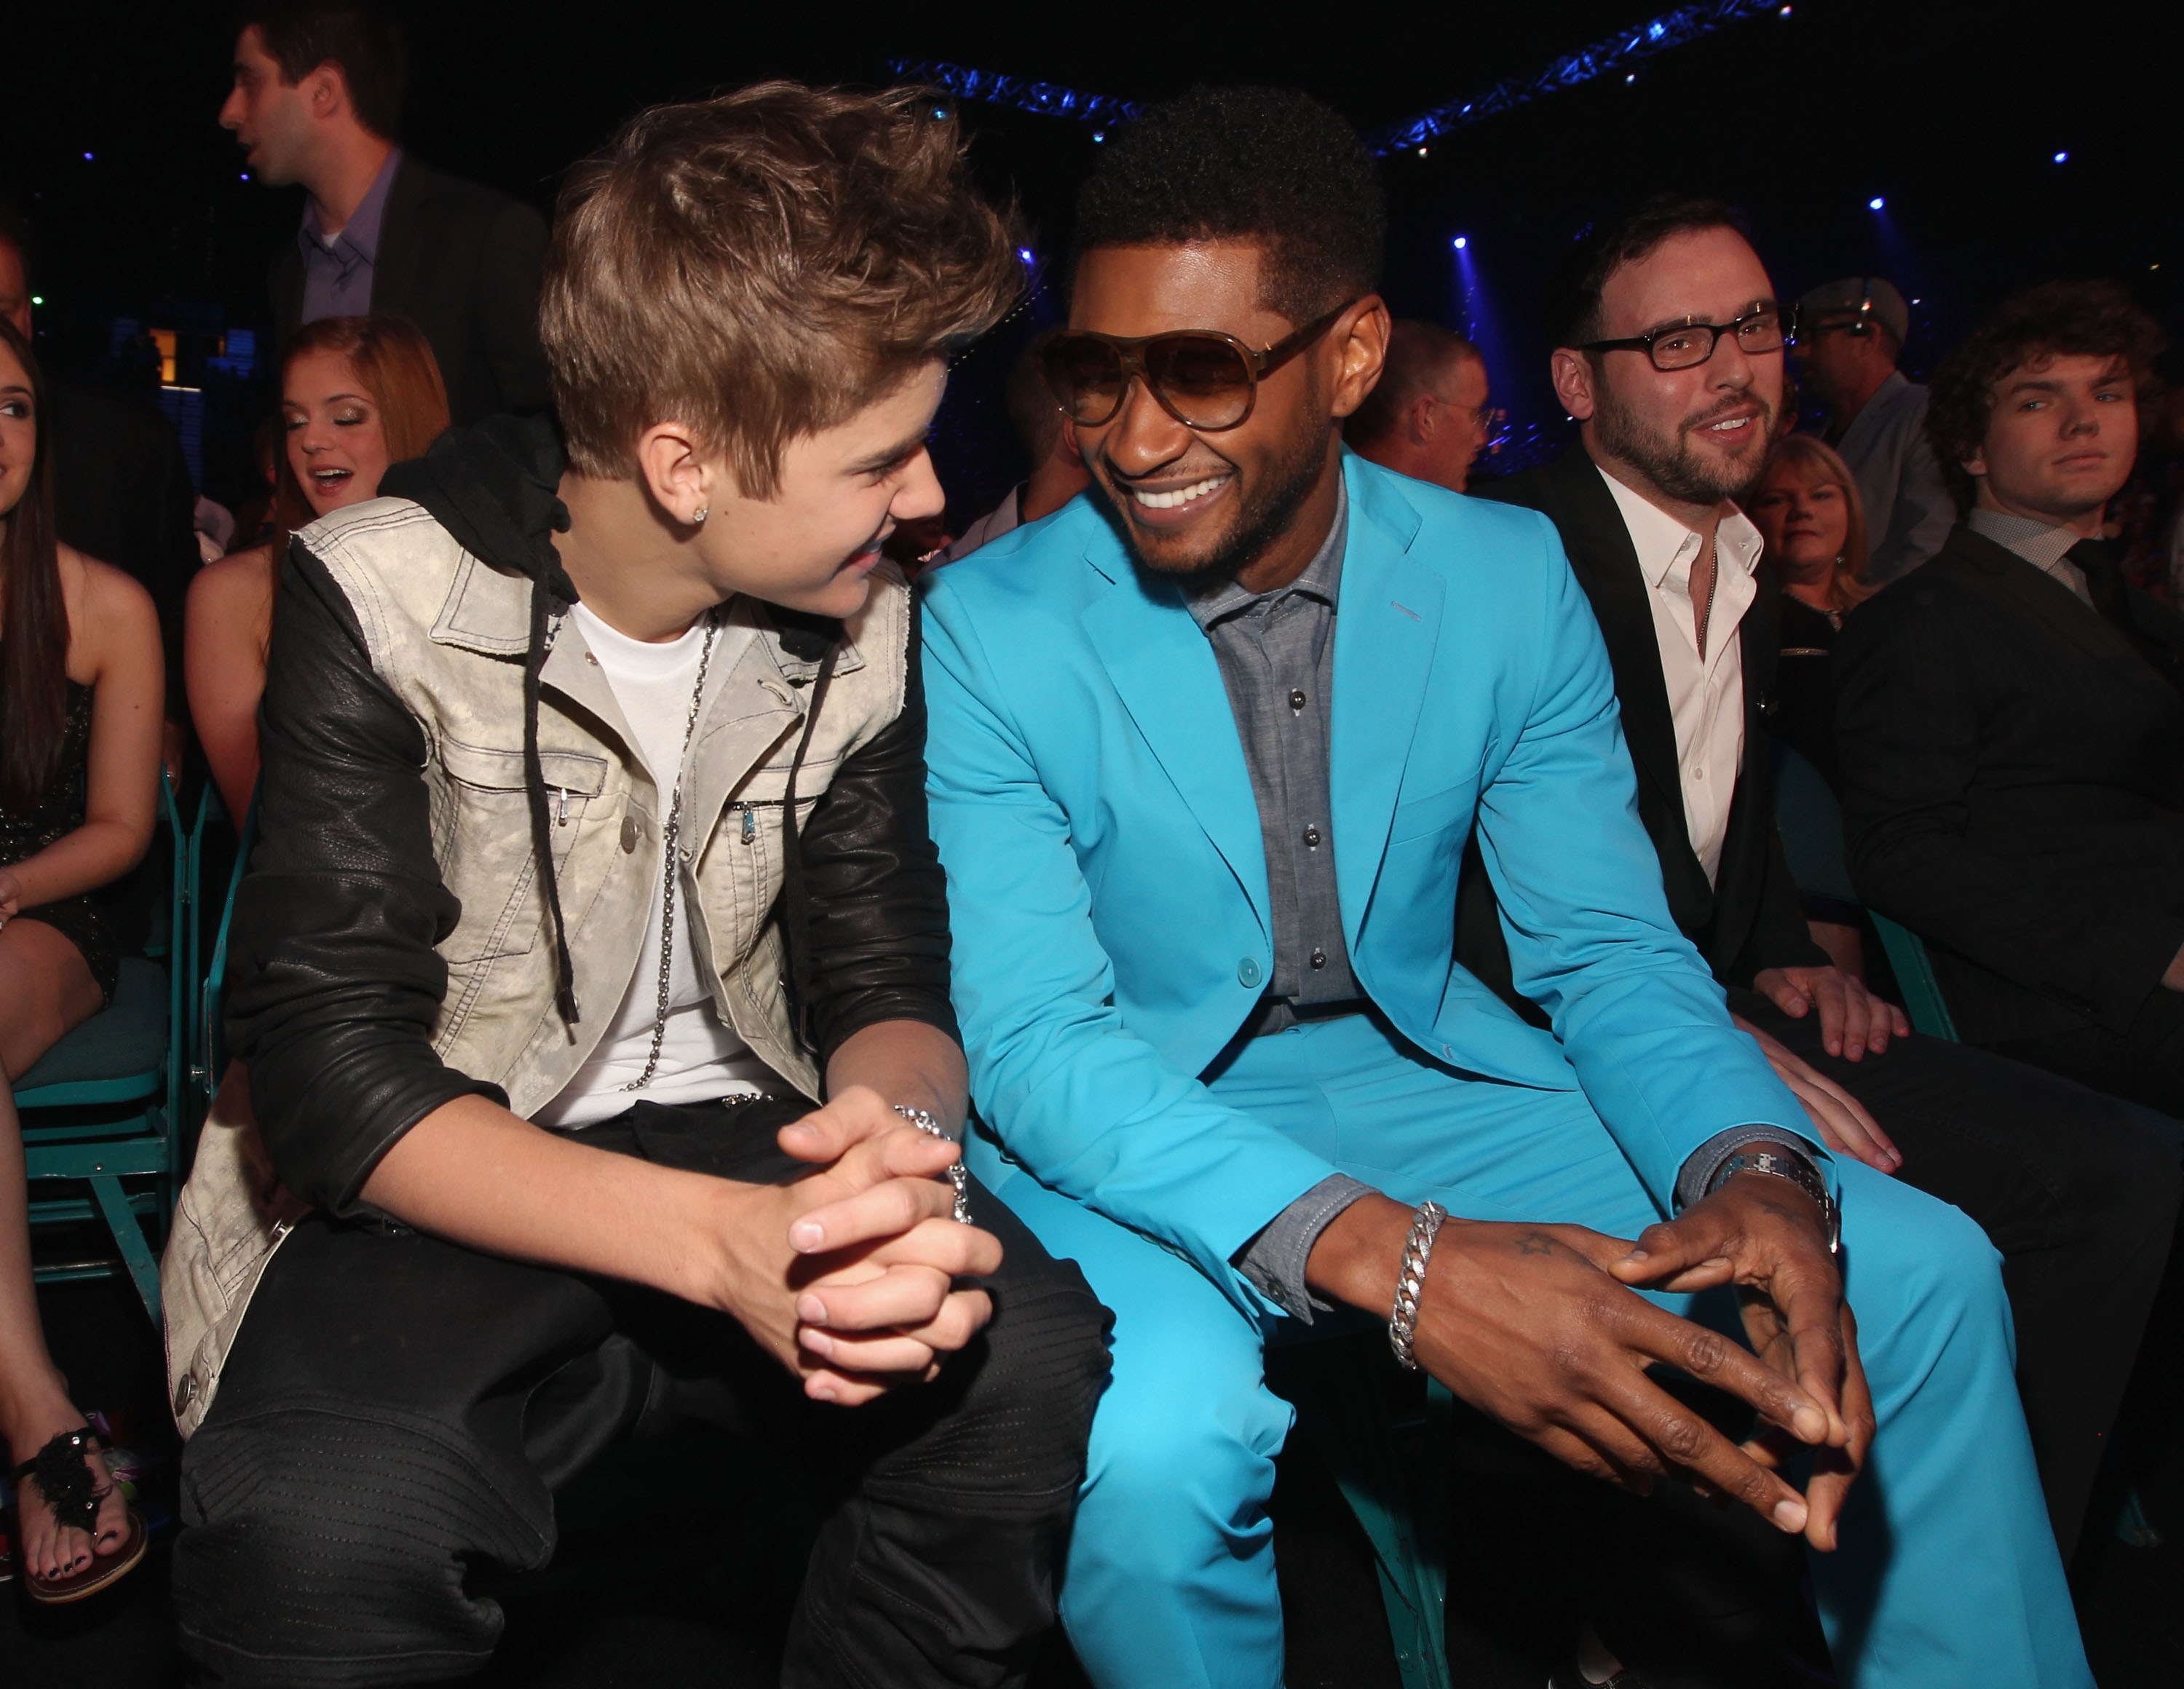 Justin Bieber  seated next to Usher sharing a conversation at an event